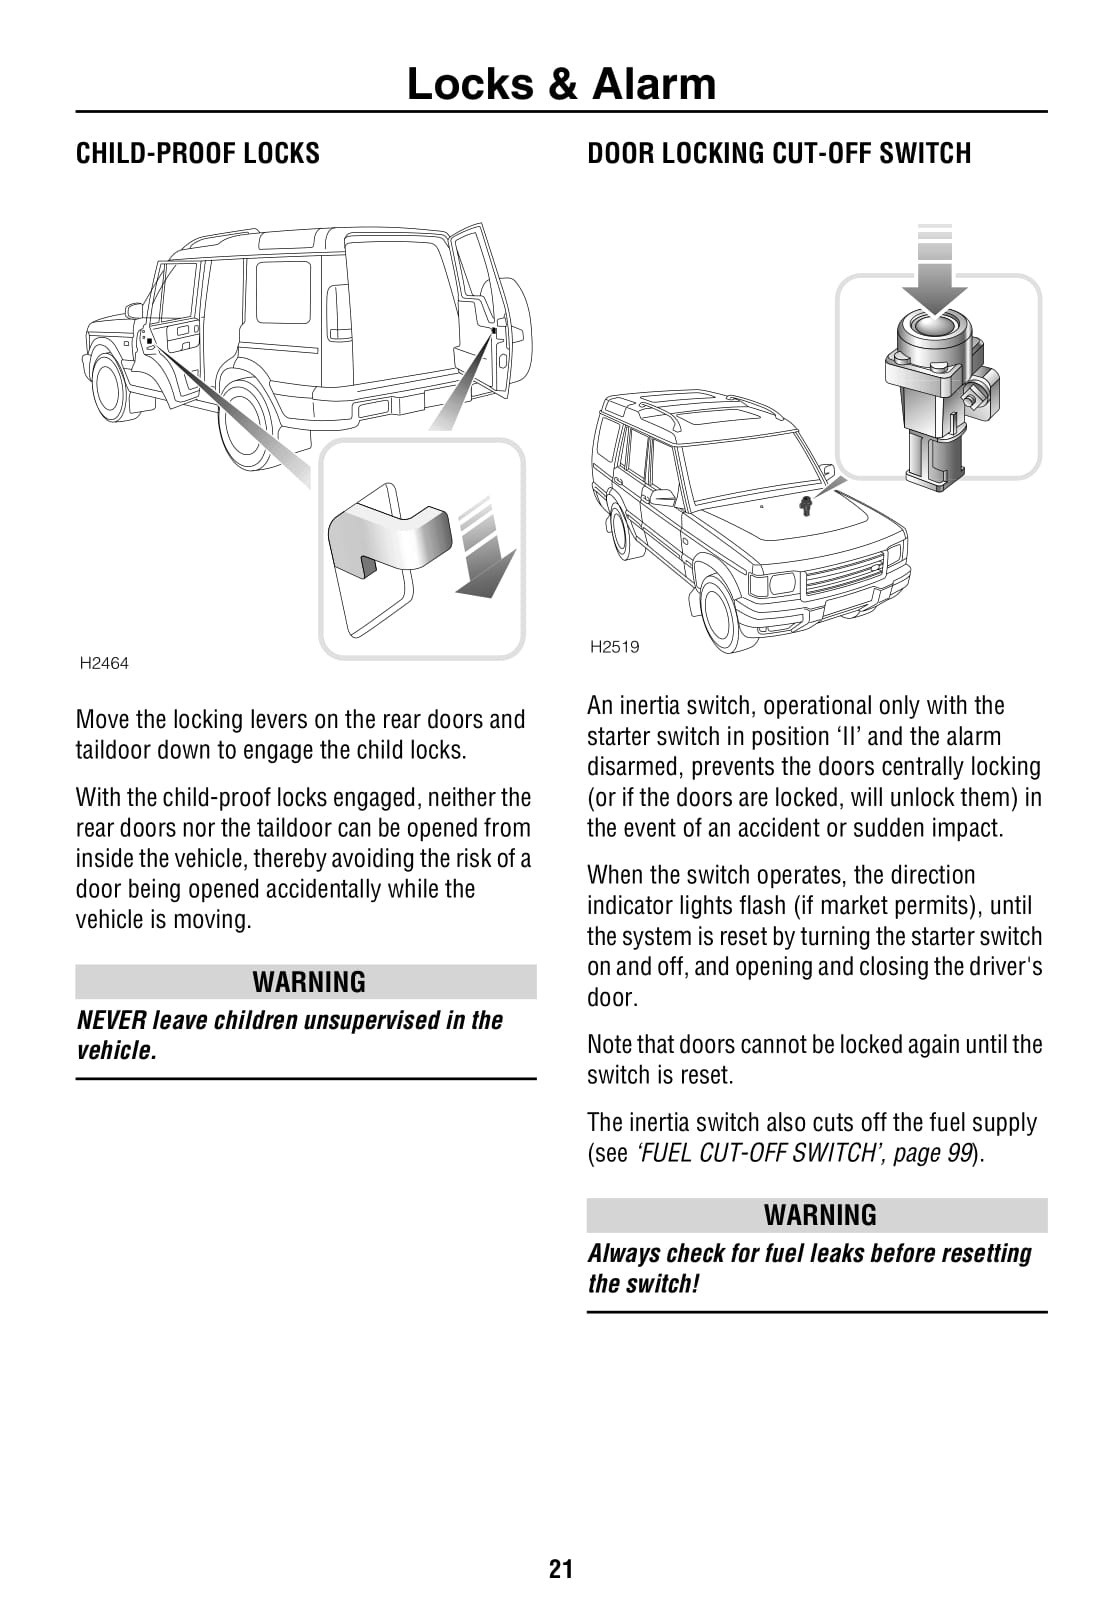 2000-2001 Land Rover Discovery 2 Owner's Manual | English